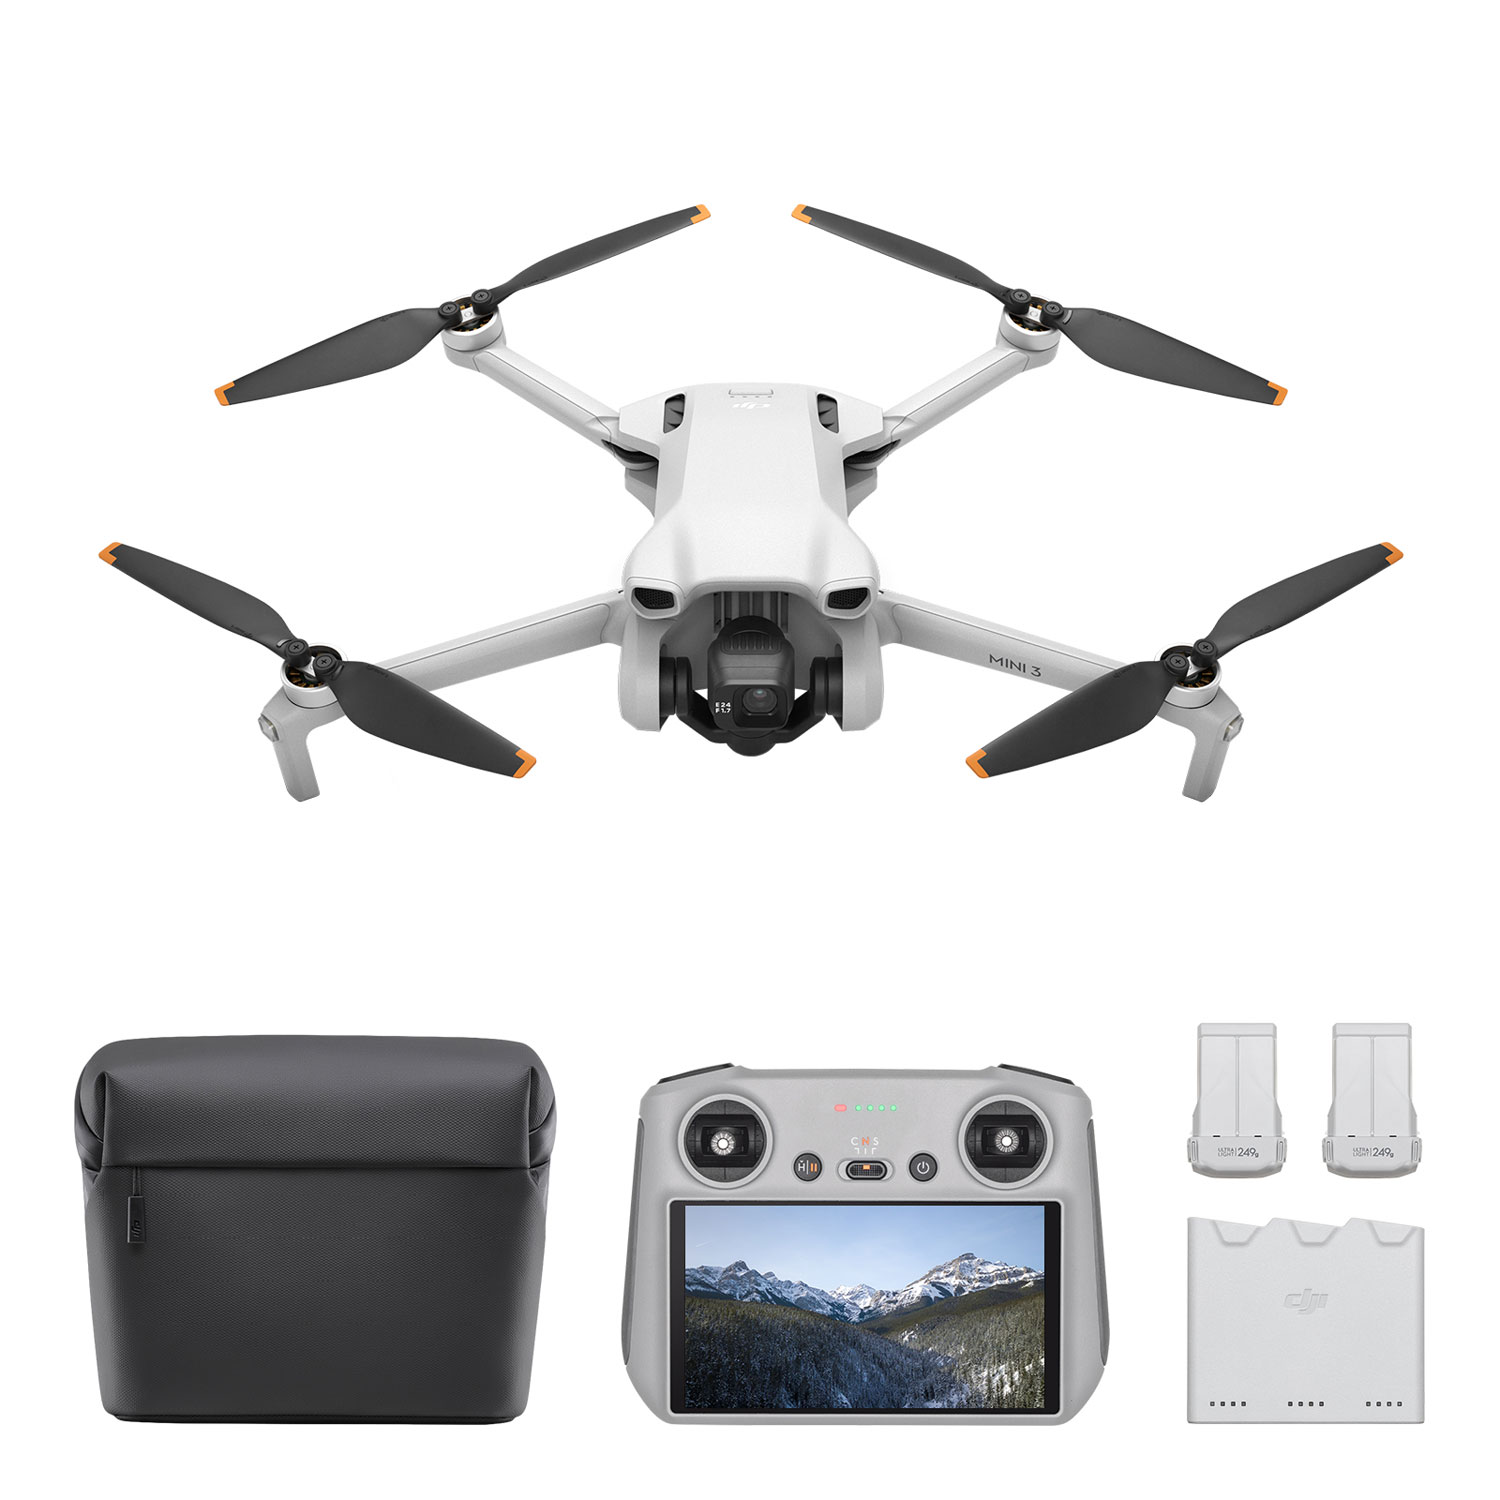 DJI Mini 3 Quadcopter Drone Fly More Combo & Remote Control with Built-in Screen (DJI RC) - Grey